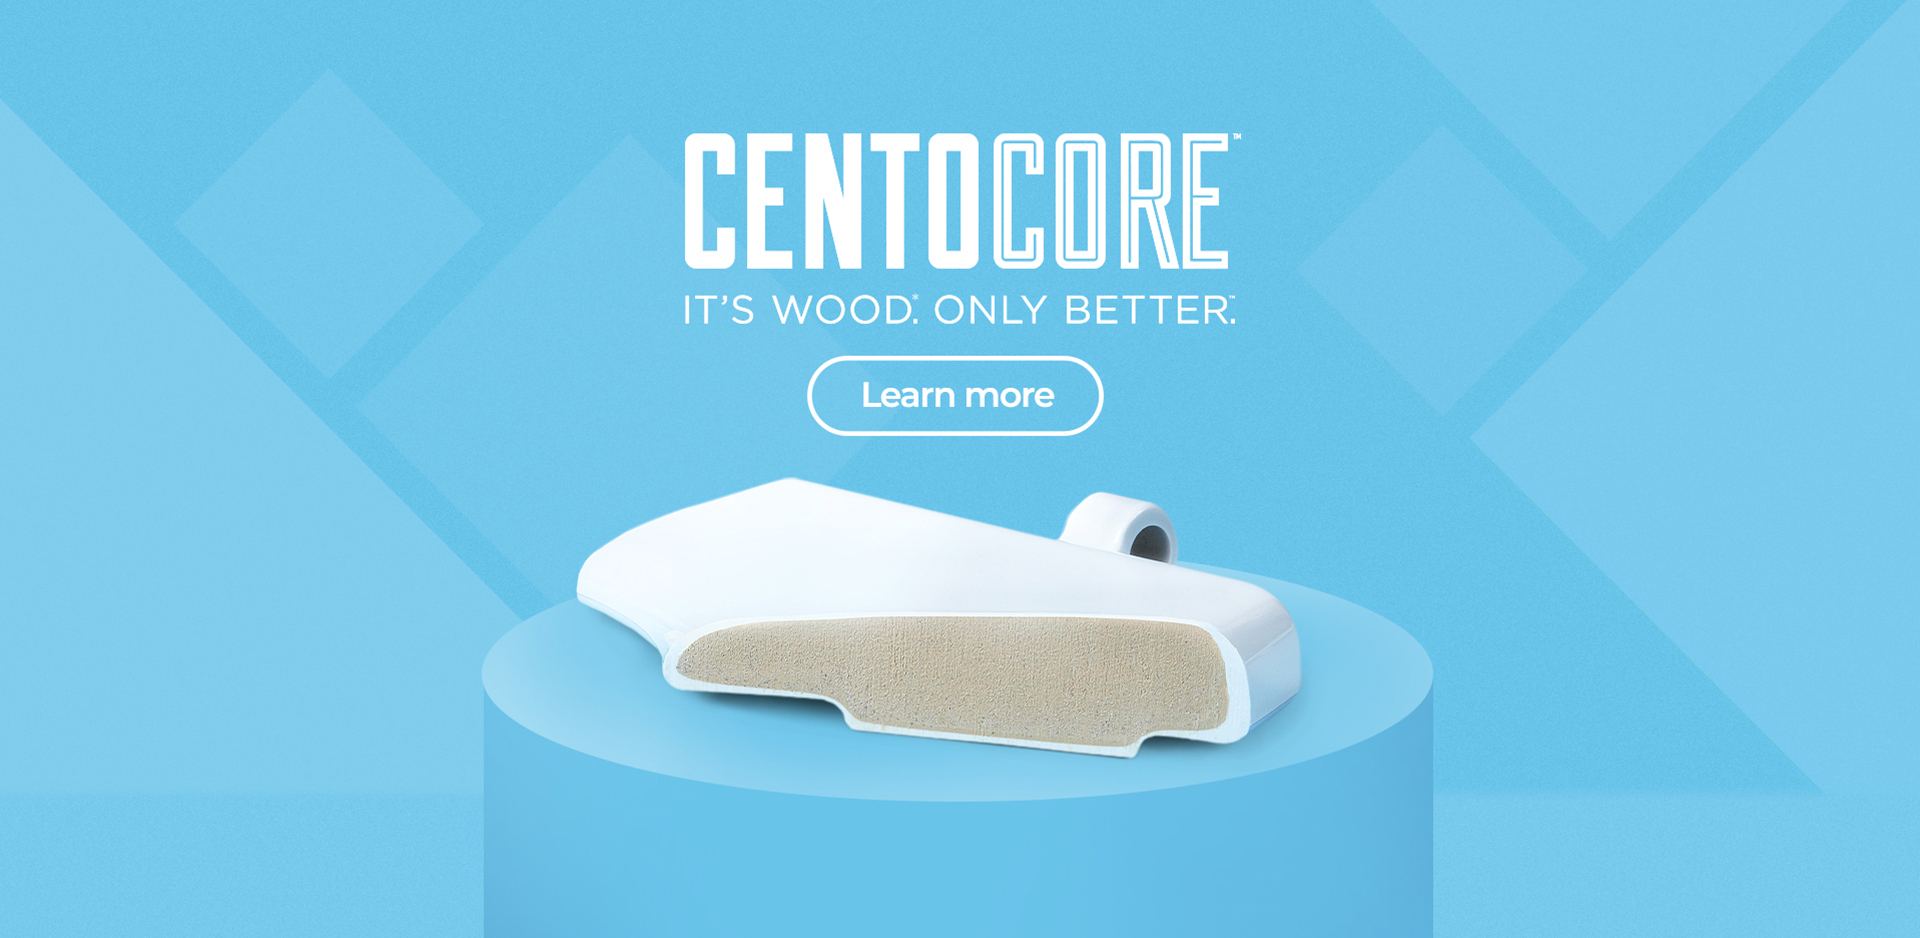 Centocore. It's wood. Only better.